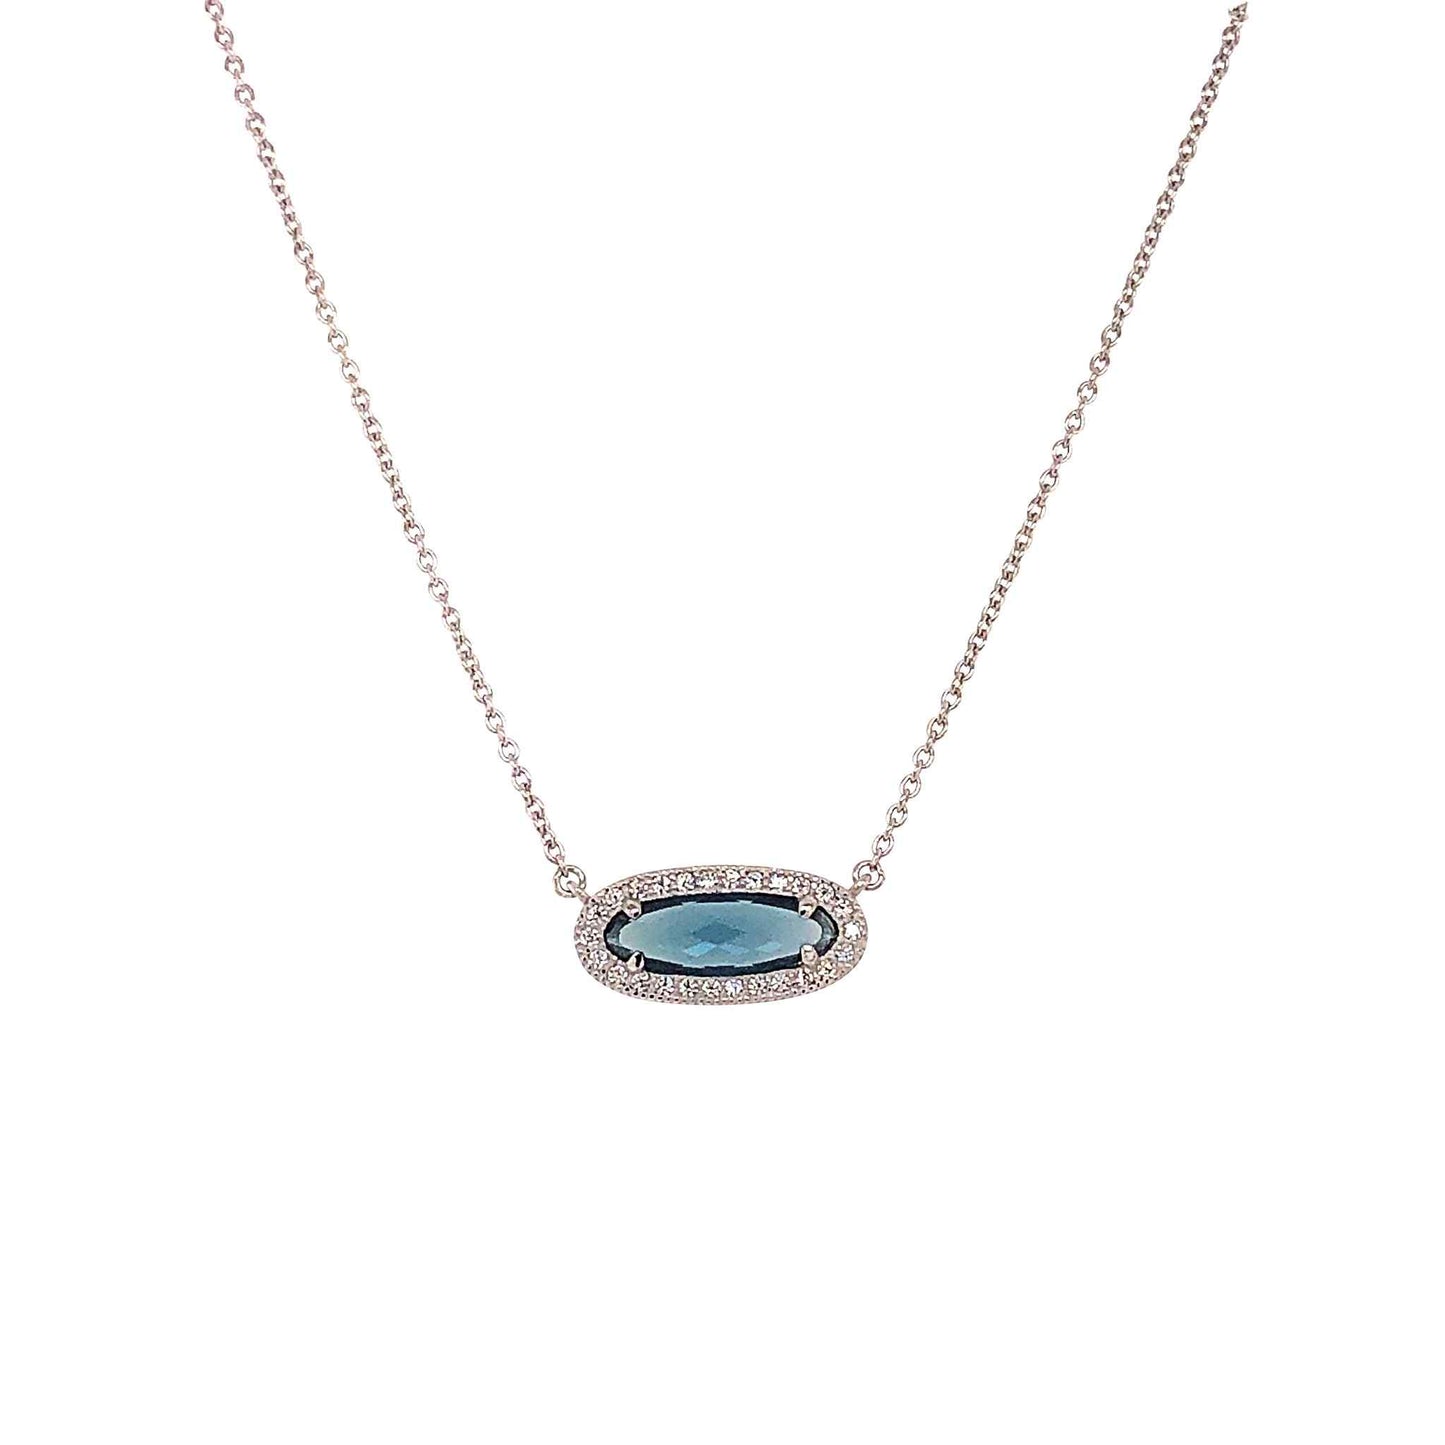 A simulated blue topaz & diamonds oblong necklace displayed on a neutral white background.